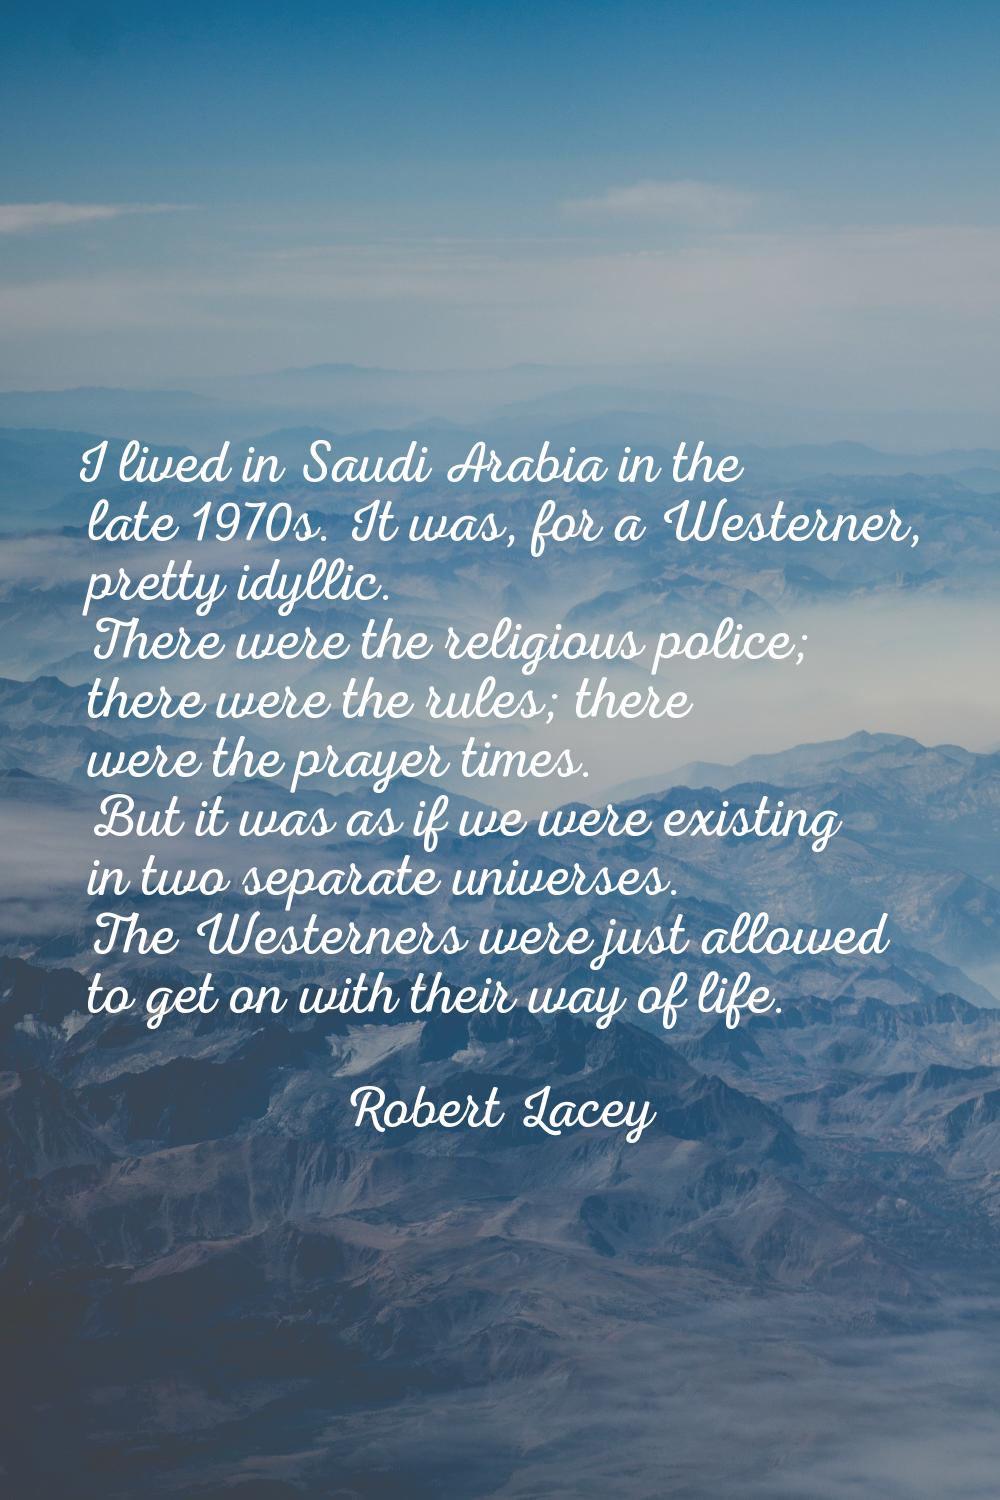 I lived in Saudi Arabia in the late 1970s. It was, for a Westerner, pretty idyllic. There were the 